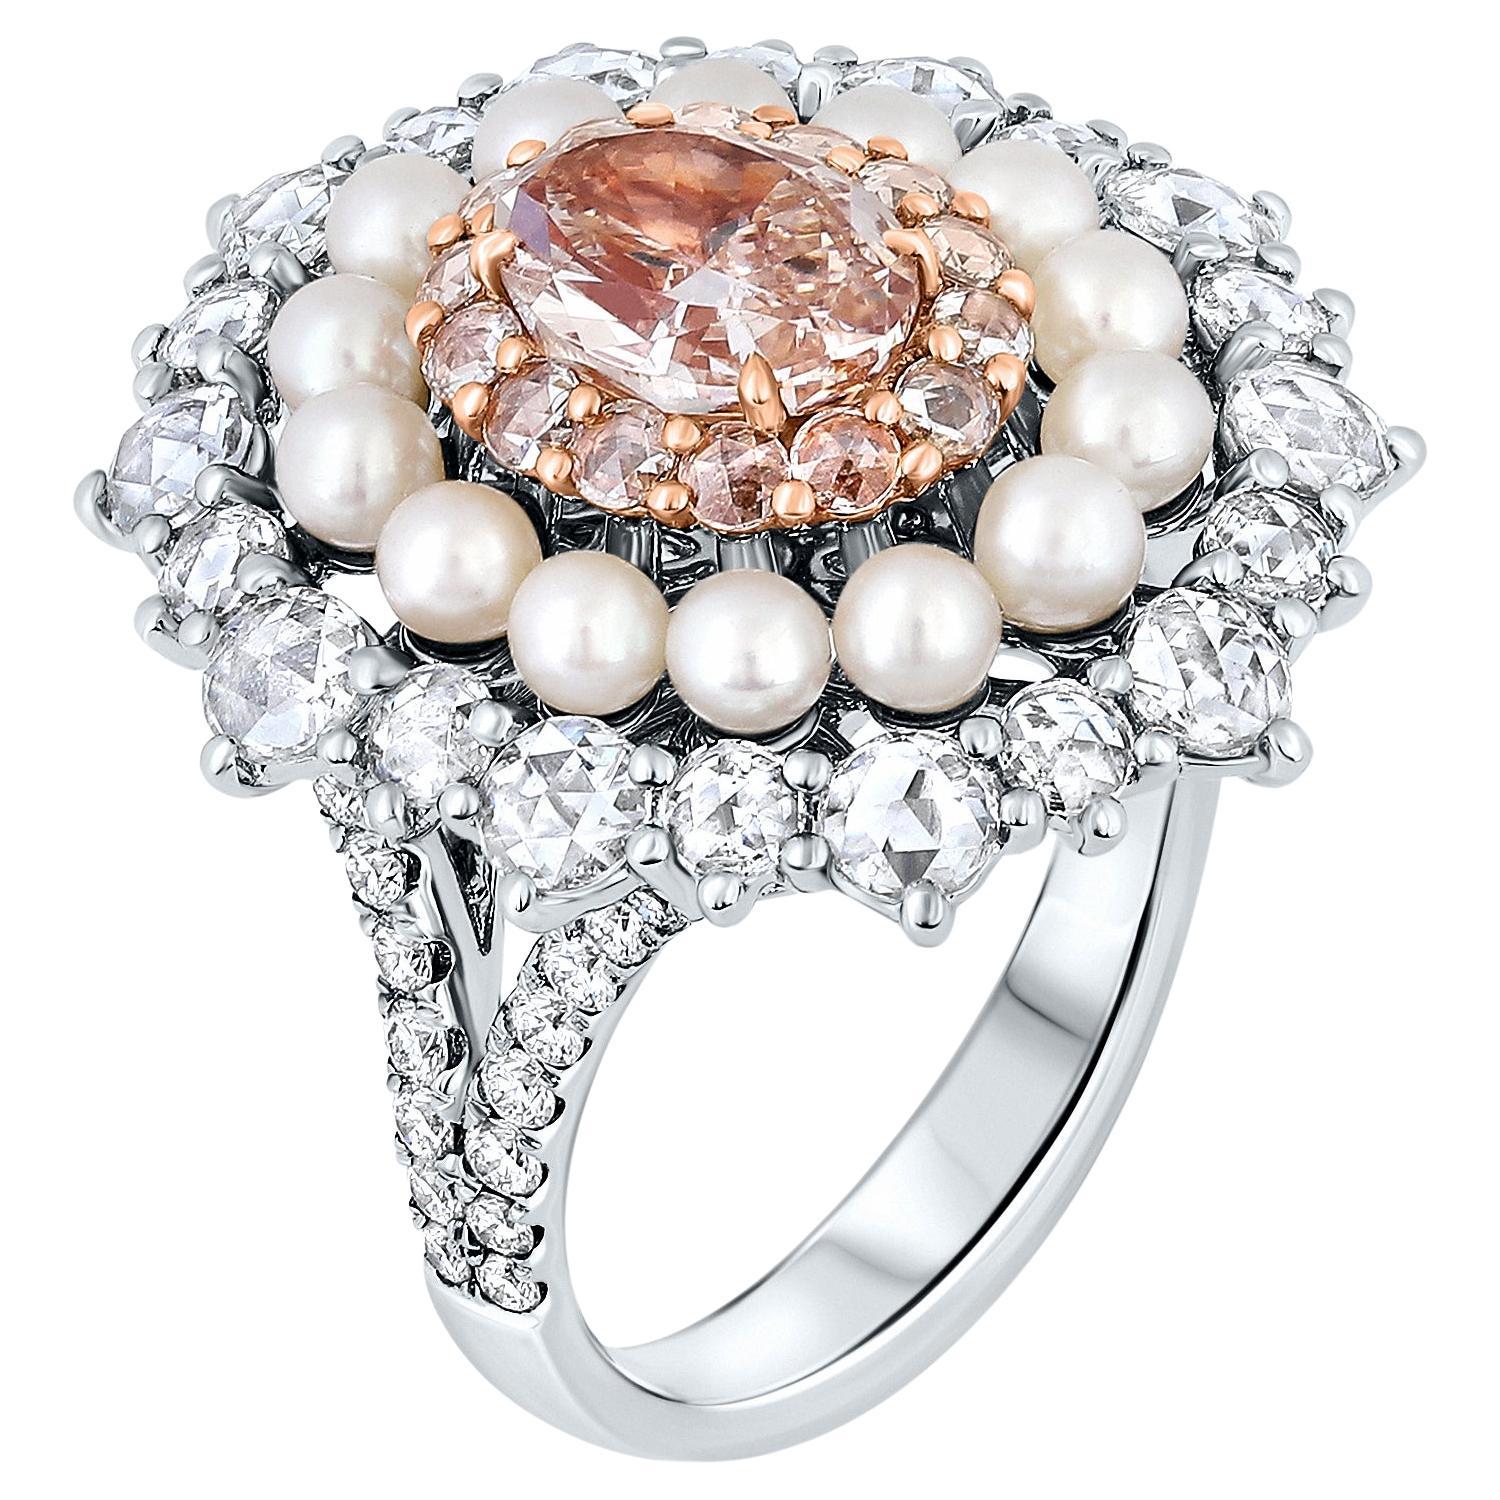 1.42 Carat Fancy Pink-Brown Diamond Cocktail Ring With Pearls, GIA Rerport. For Sale